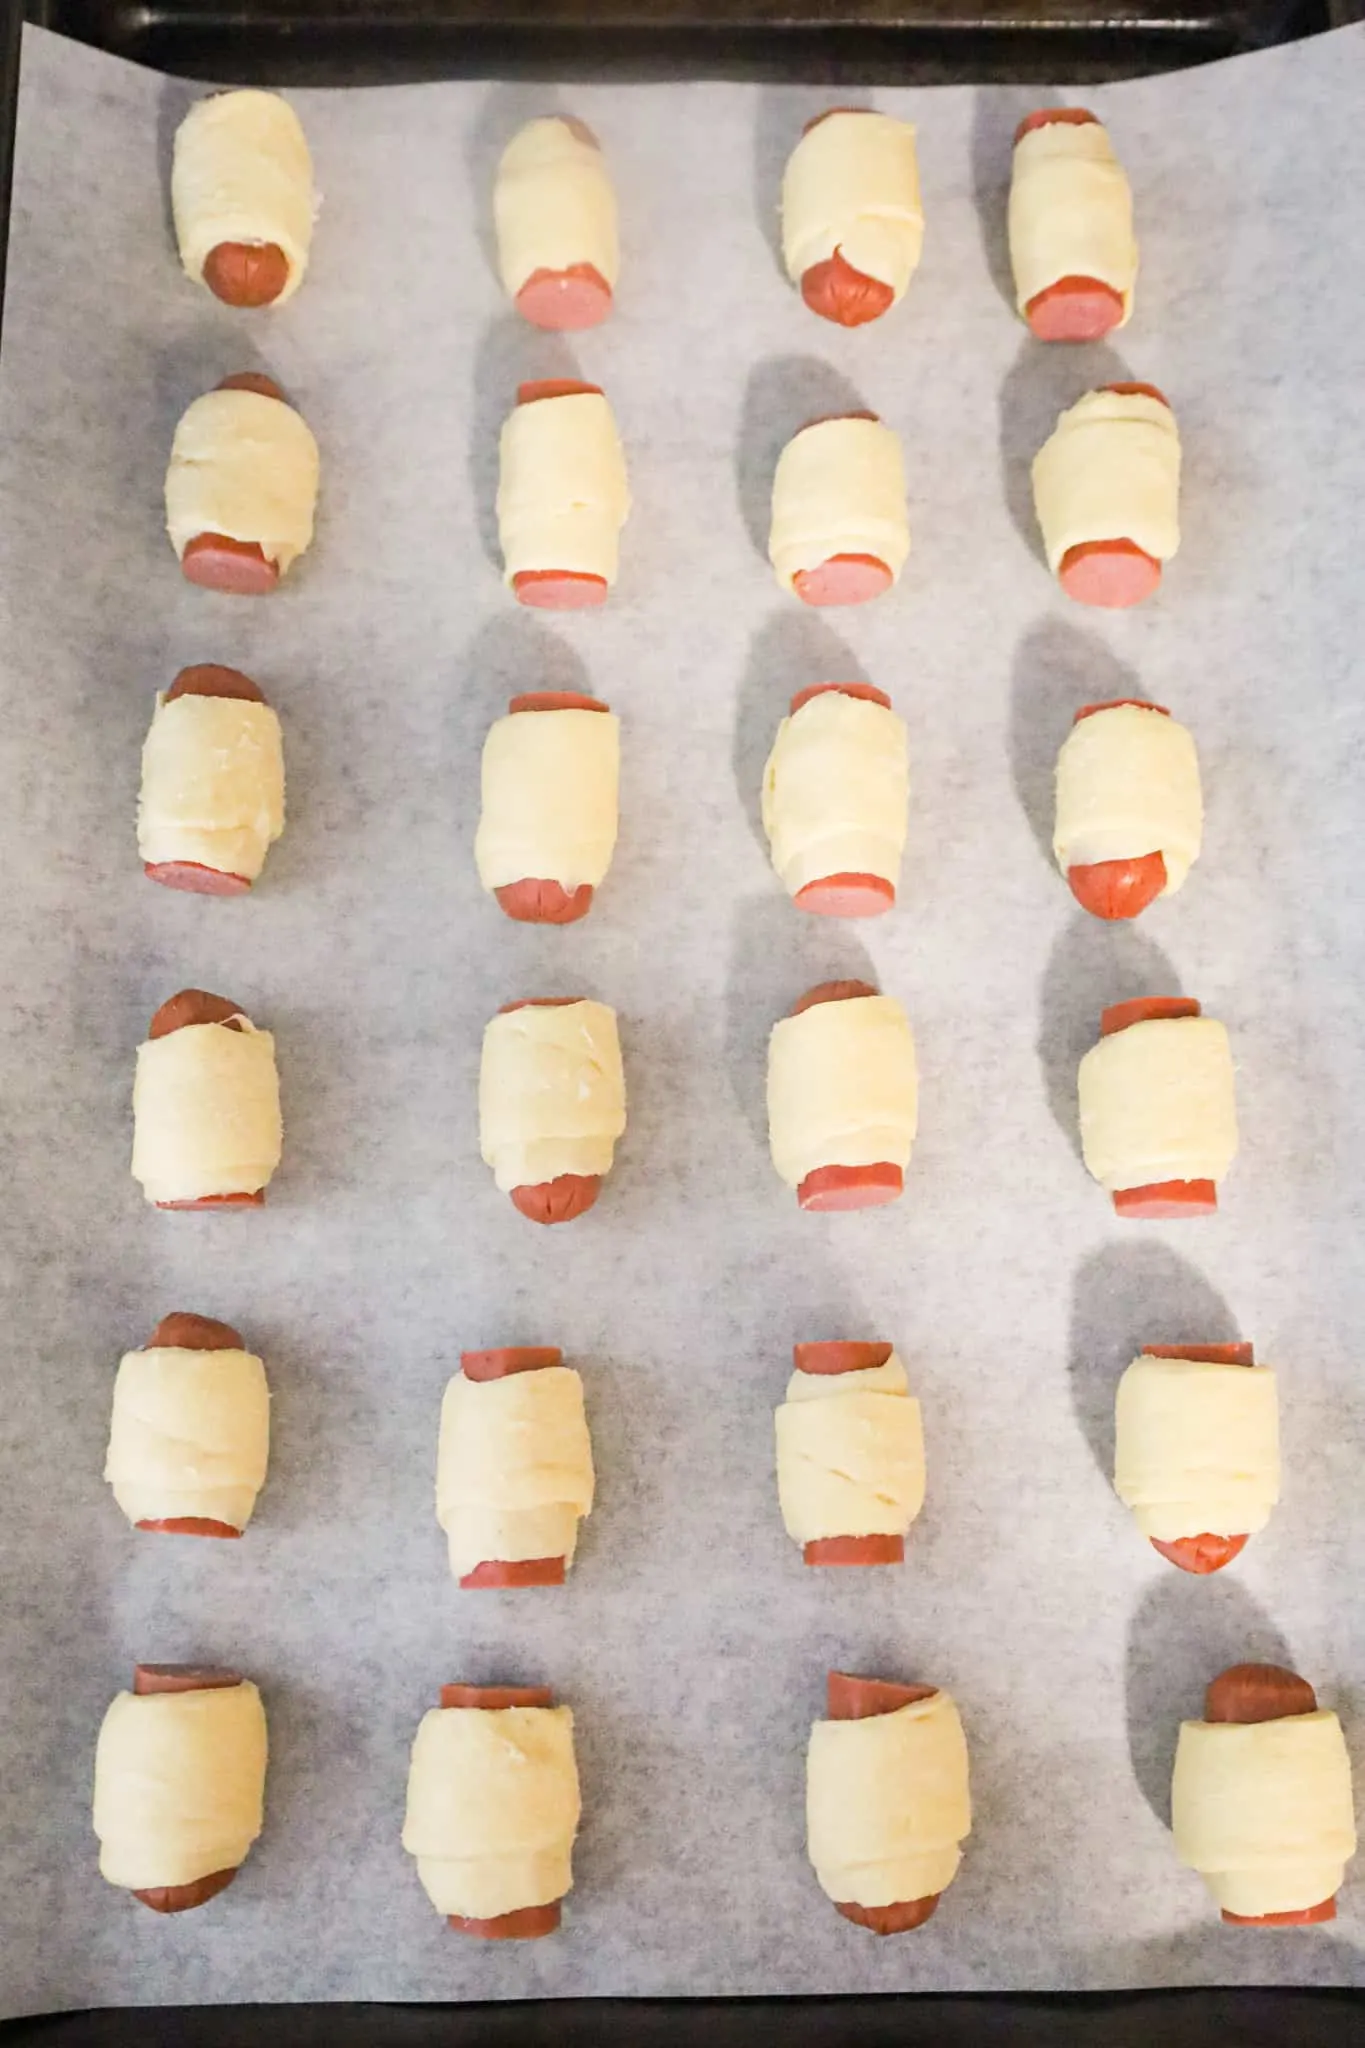 hot dog pieces wrapped in crescent dough on a parchment lined baking sheet